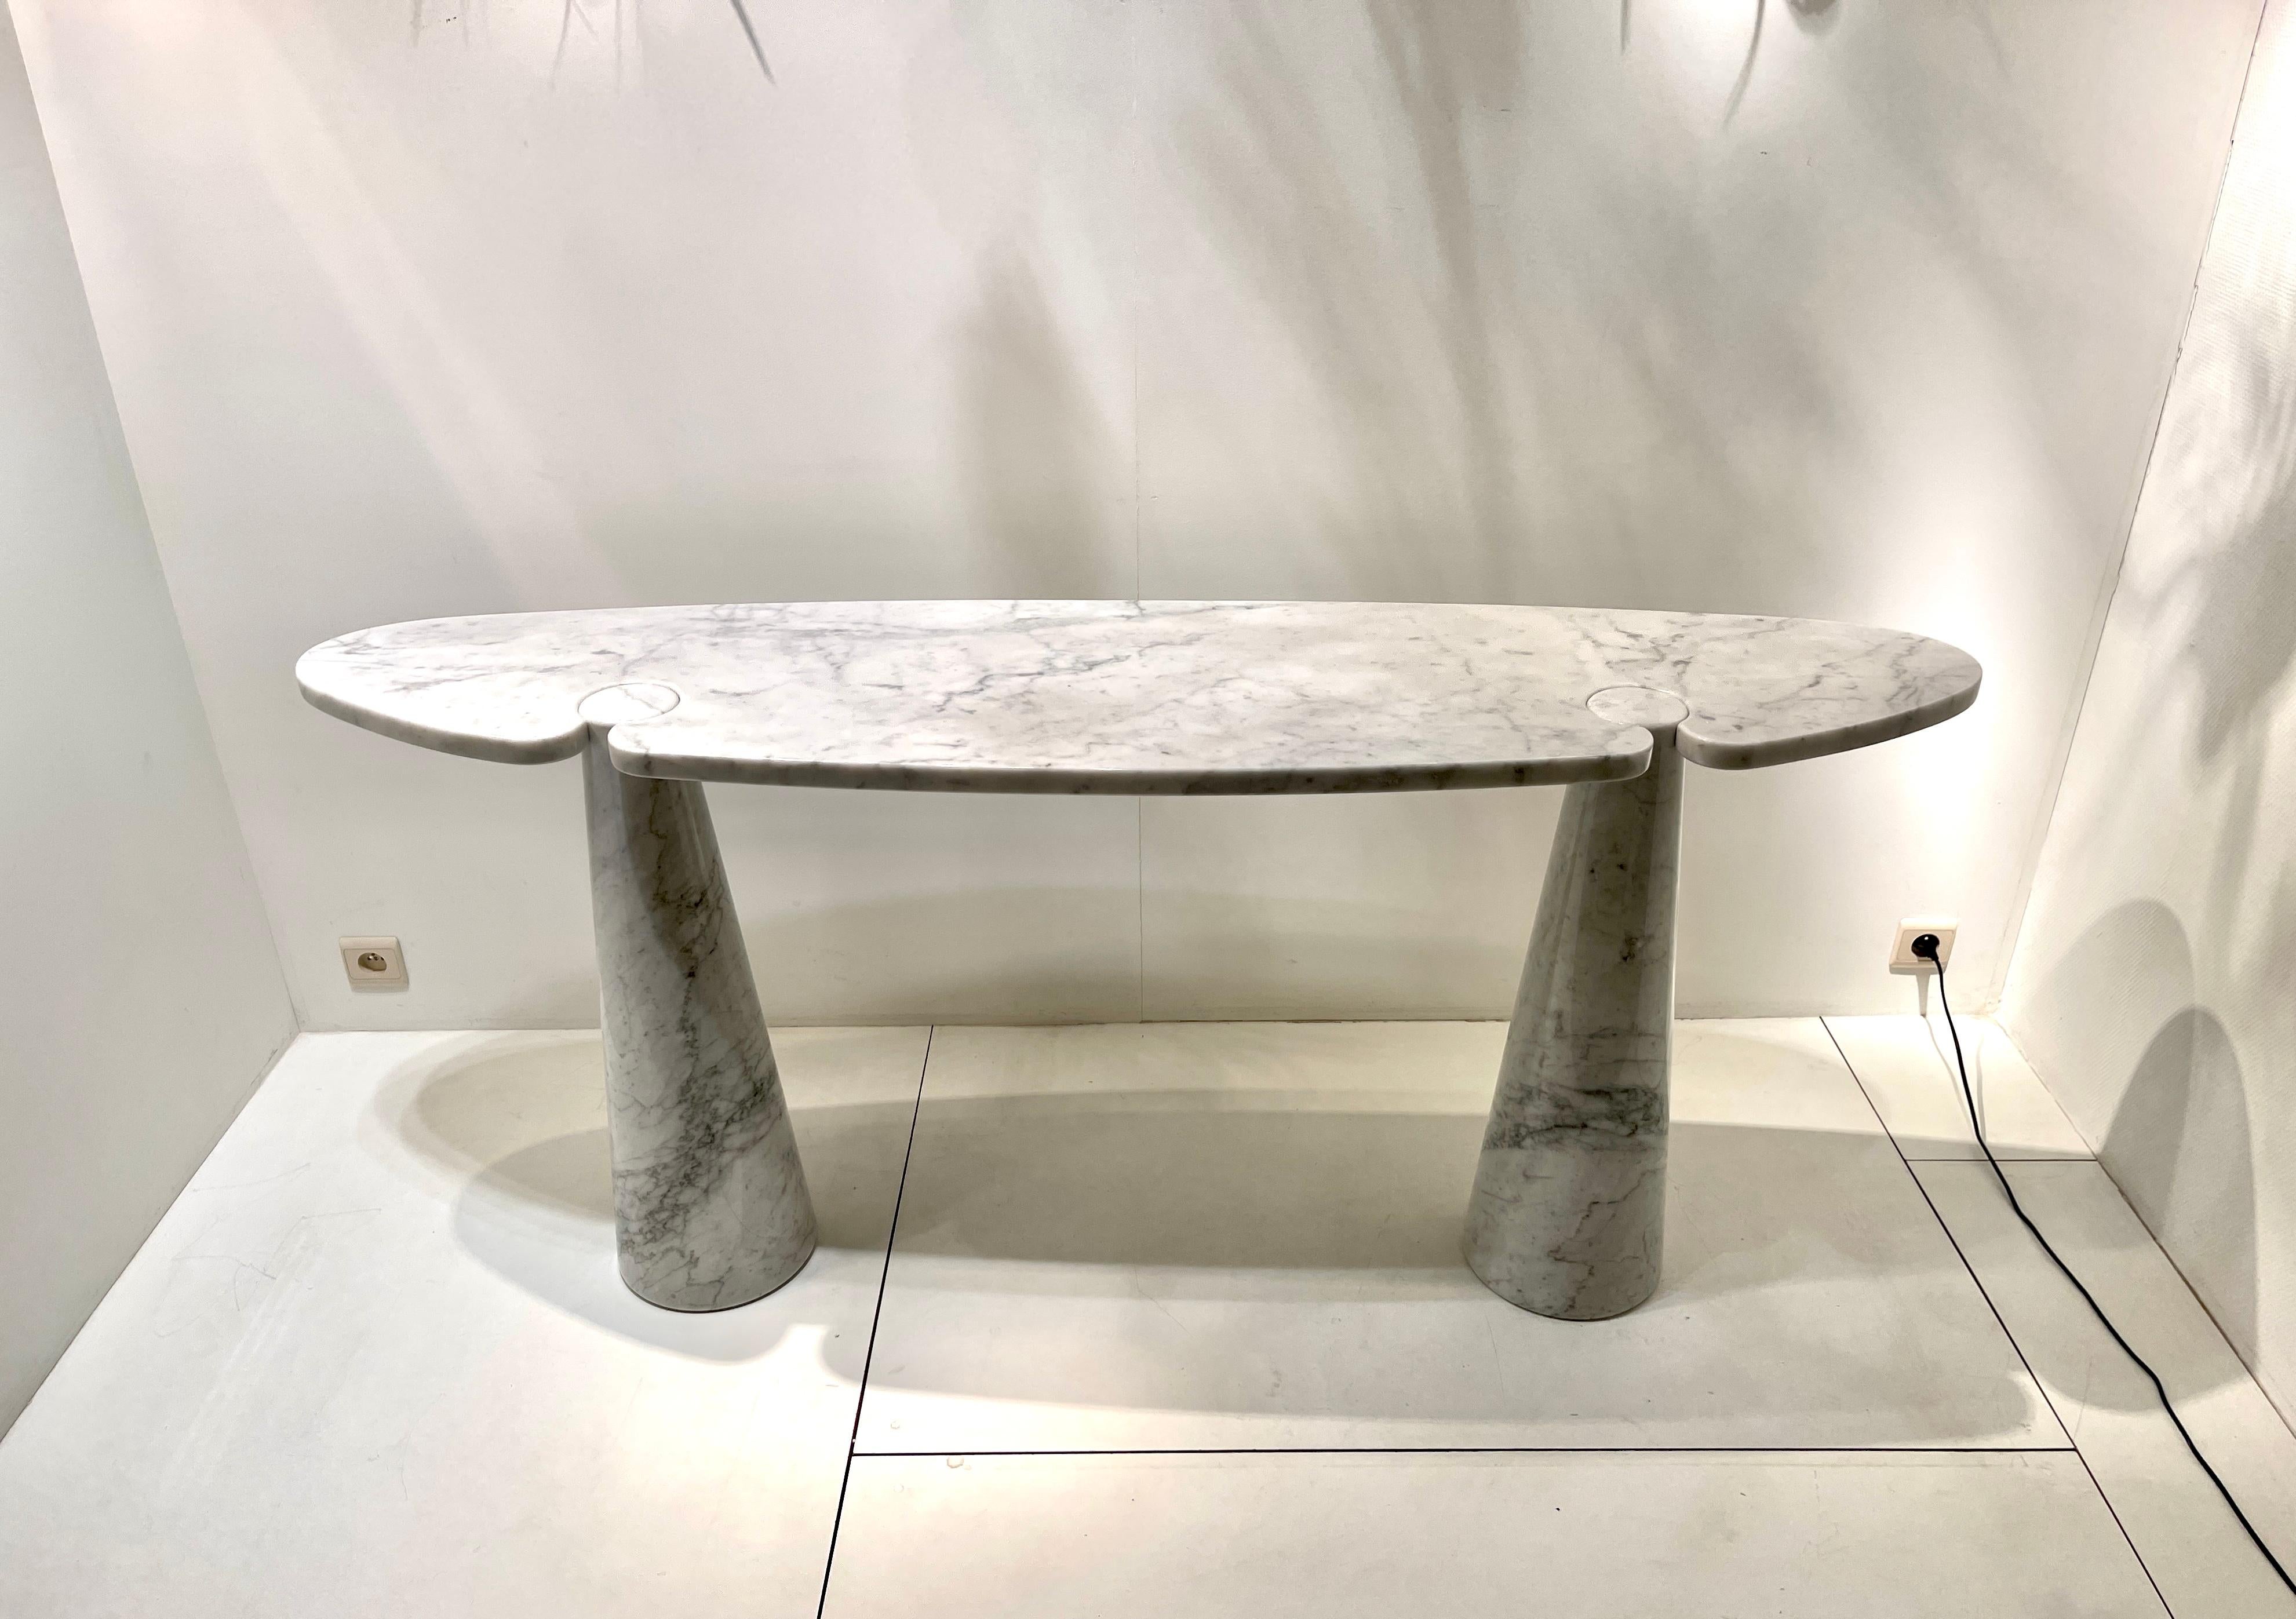 
Arabescato marble console by Angelo Mangiarotti for Ed.Skipper, Italy 1970
Editor by Skipper Italy, 1970 (see sticker)
The veins of the top are really stunning with some yellow streaks that add even more beauty to the pattern.
This console table is